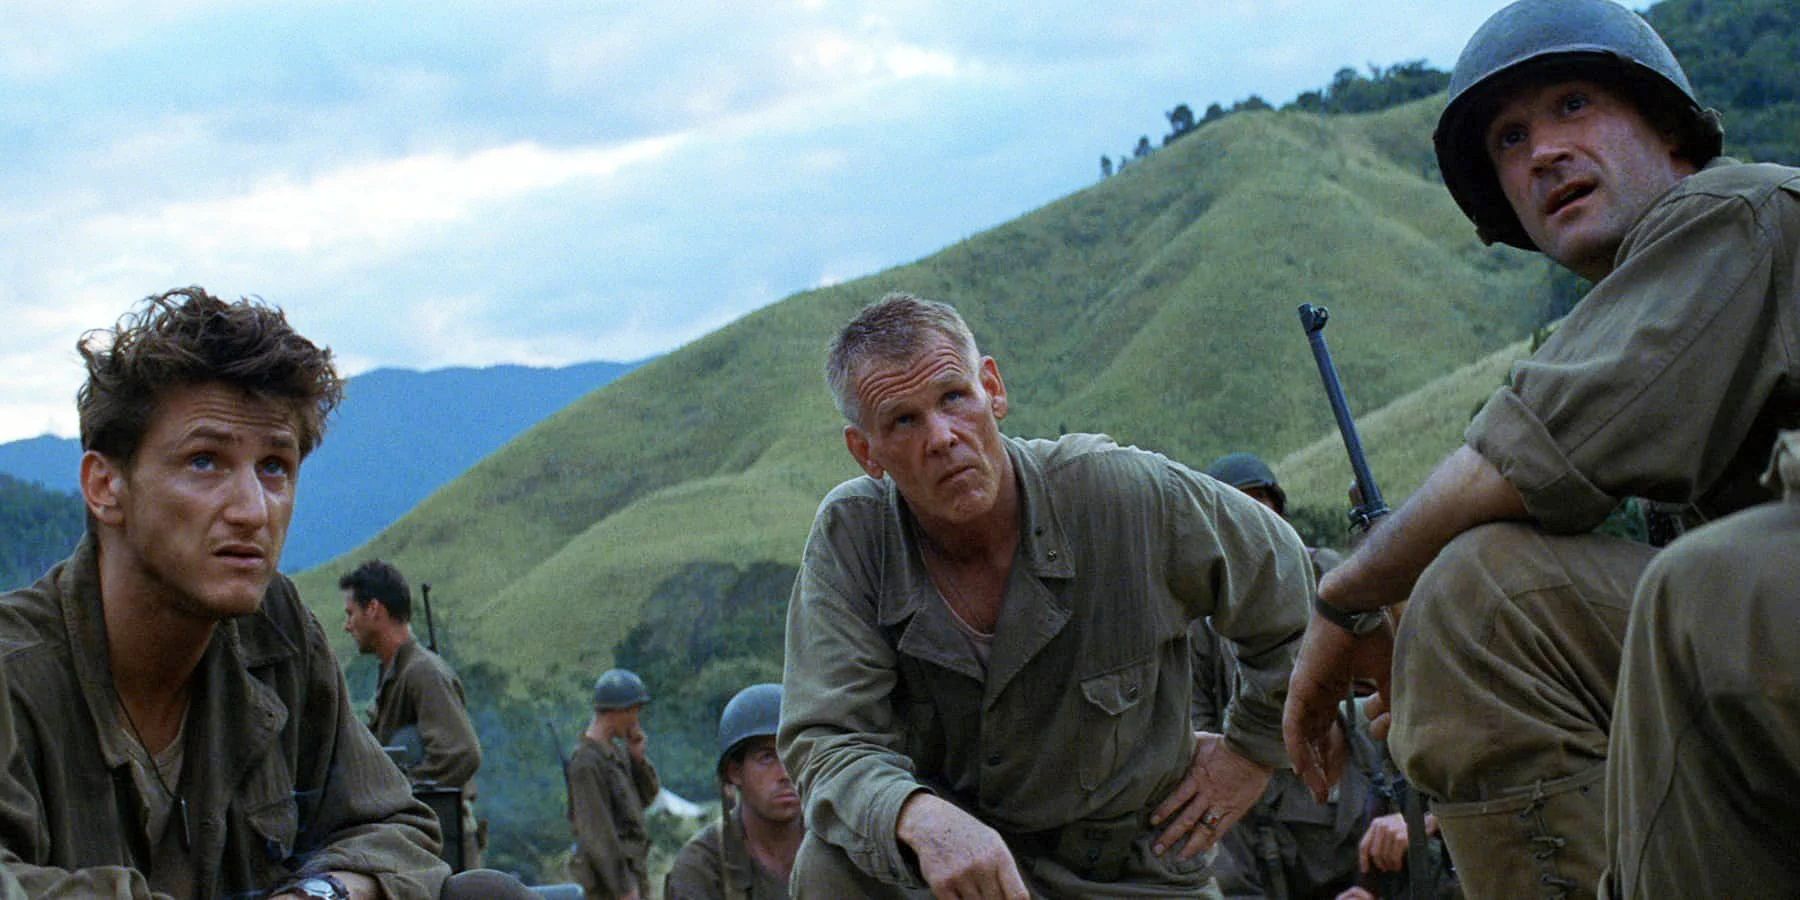 Sean Penn, Nick Nolte, and Elias Koteas gathered together in The Thin Red Line.